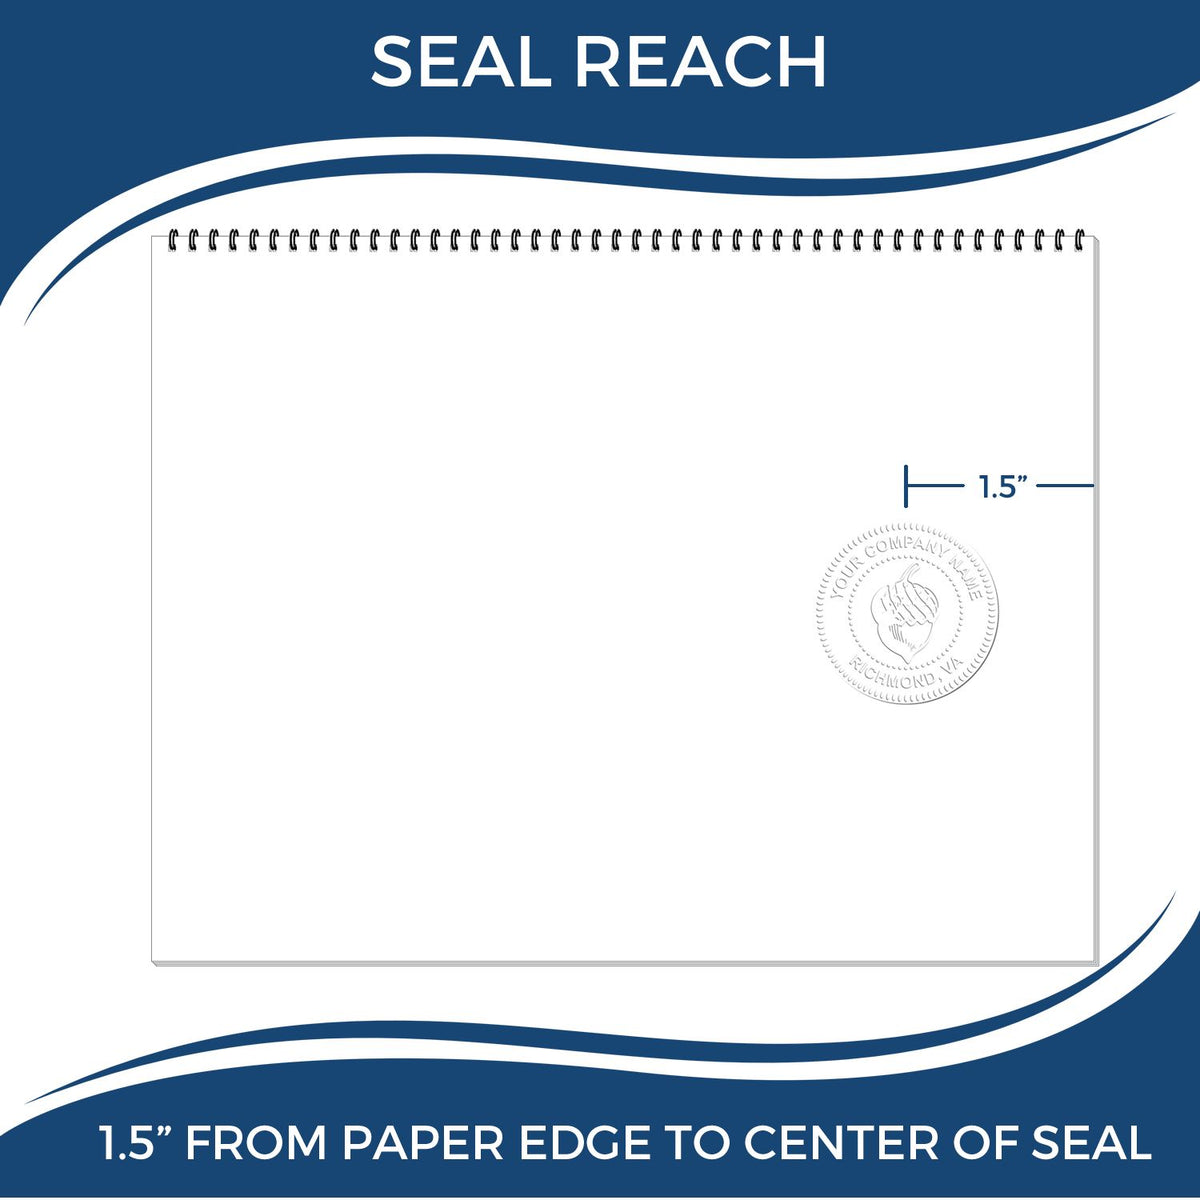 An infographic showing the seal reach which is represented by a ruler and a miniature seal image of the Gift Pennsylvania Architect Seal